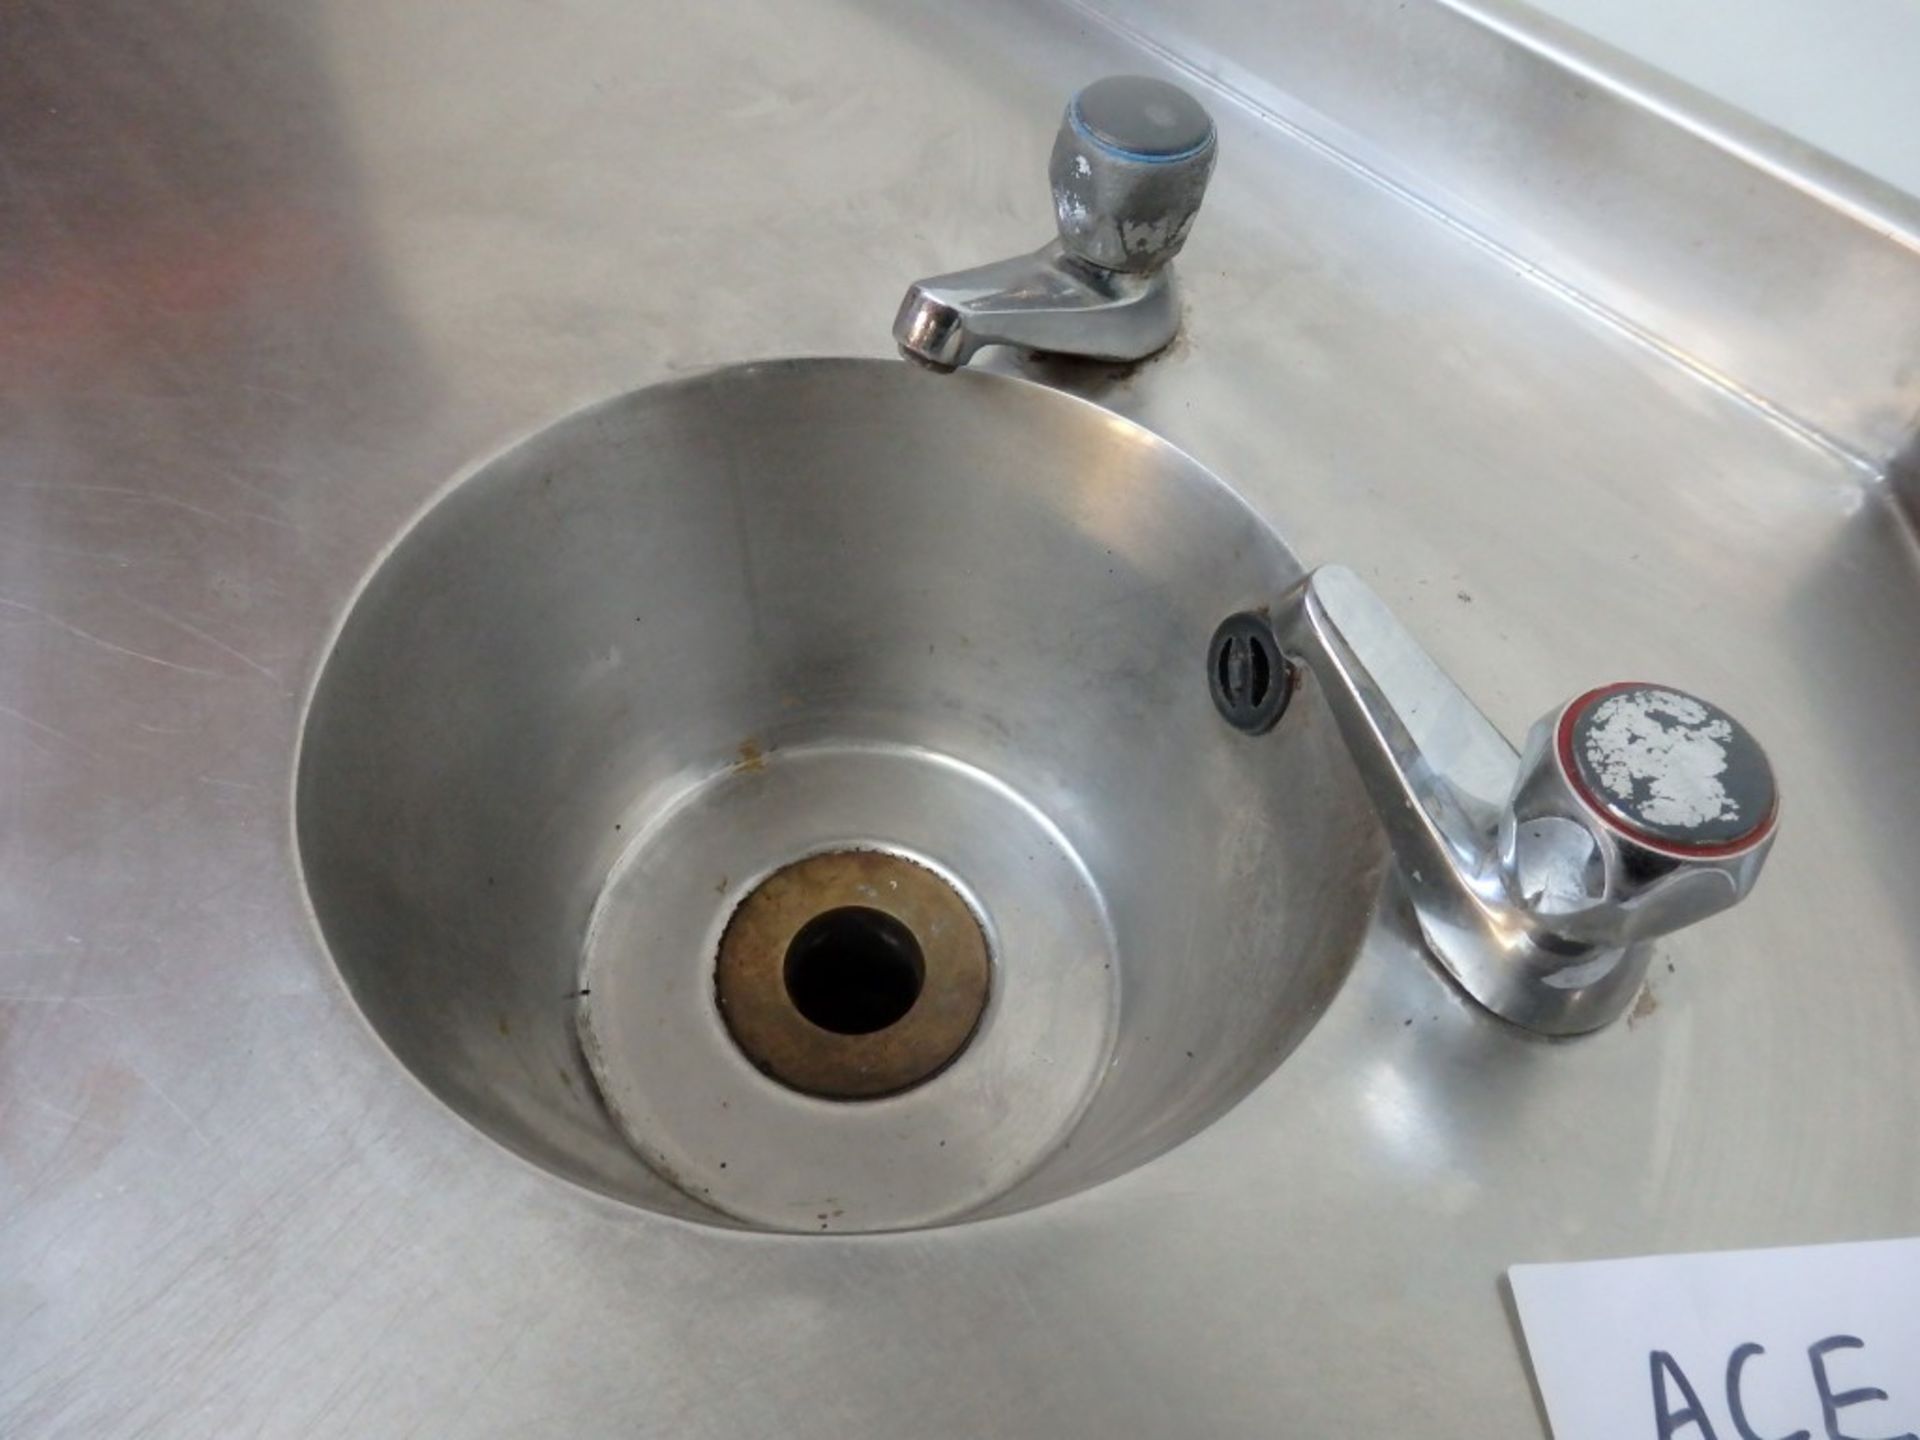 1 x Stainless Steel Free-standing Sink Basin Unit With Hot and Cold Taps - H87 x W130 x D50 cms - - Image 2 of 4